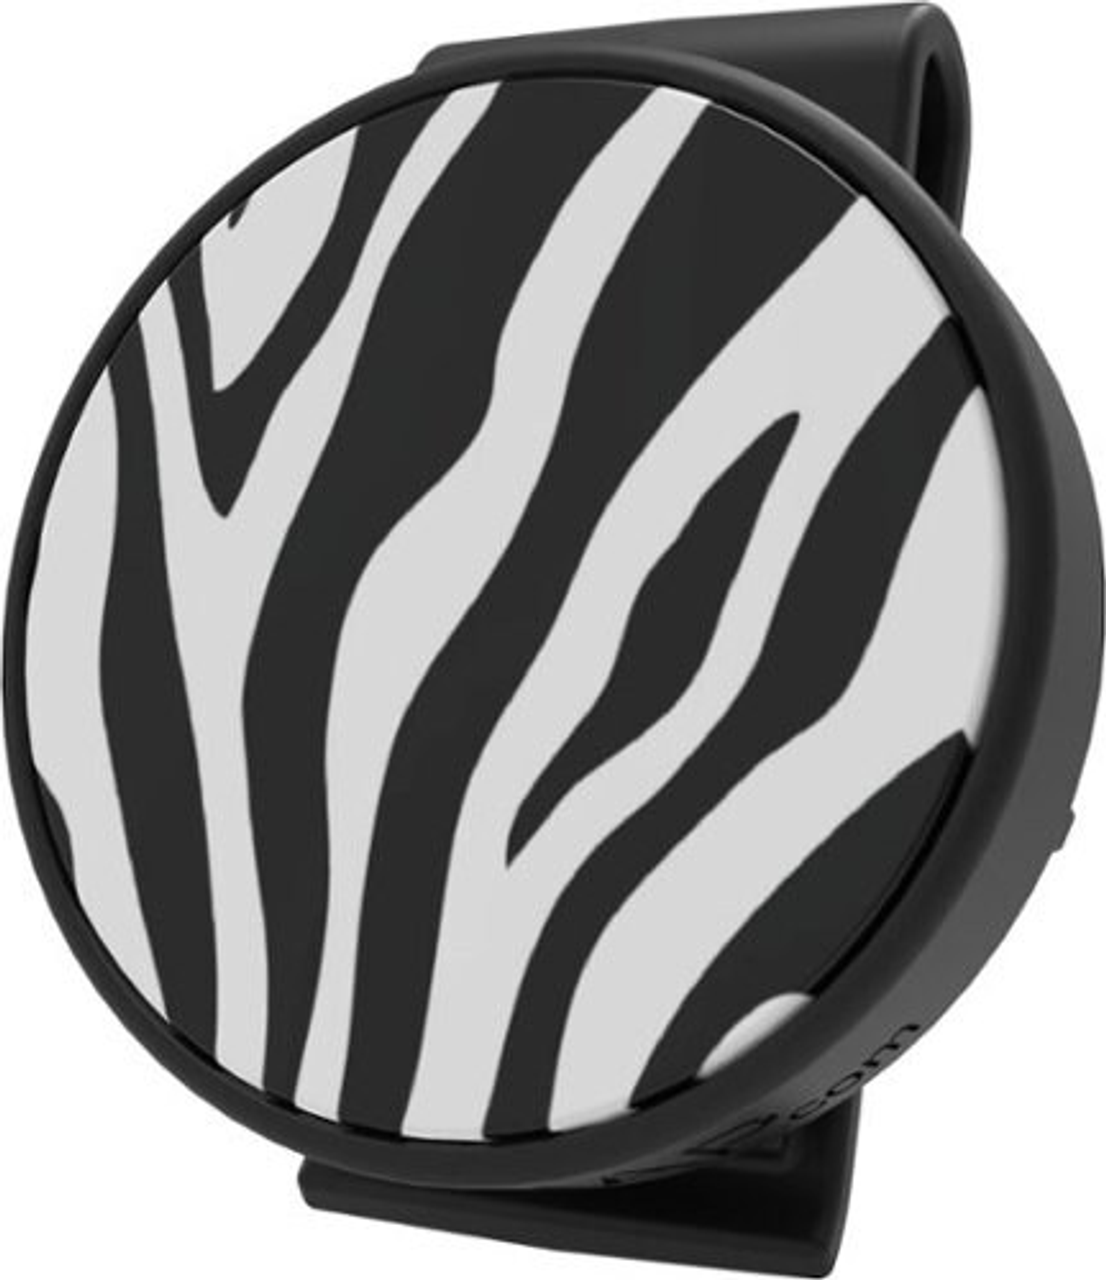 SNAP CLIP - Universal Remote for Mobile Devices - Zebra